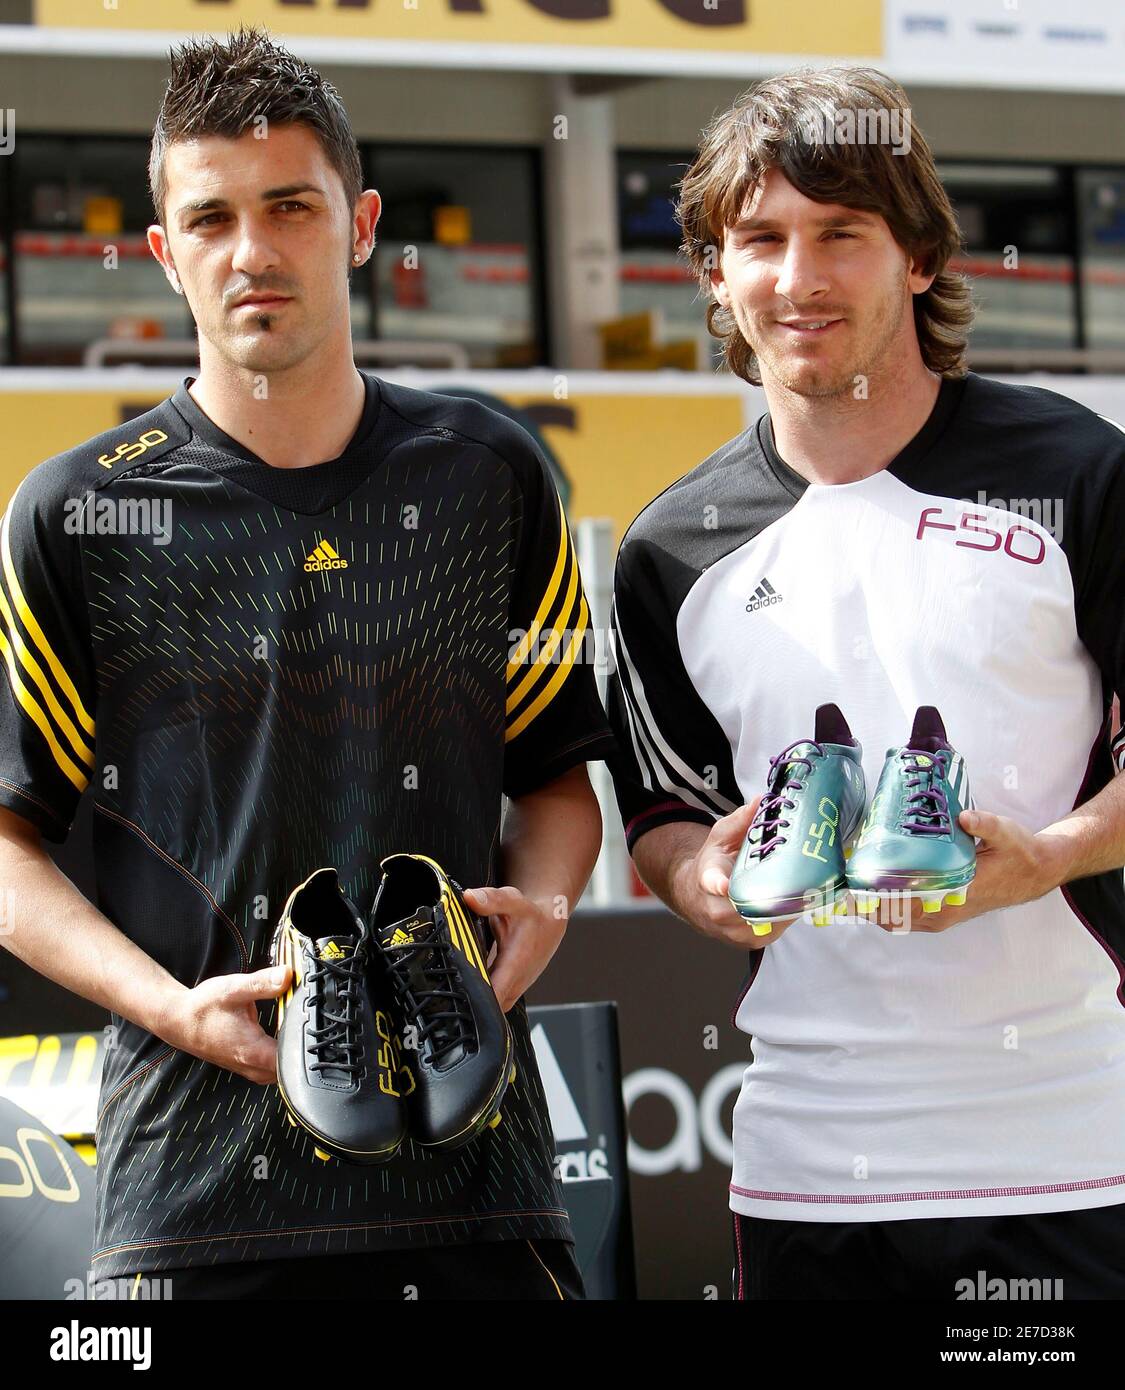 Argentina's national soccer team player Lionel Messi (R) and national team player David Villa (L) display the new F50 adiZero soccer boots during promotional event at Montmelo circuit near Barcelona